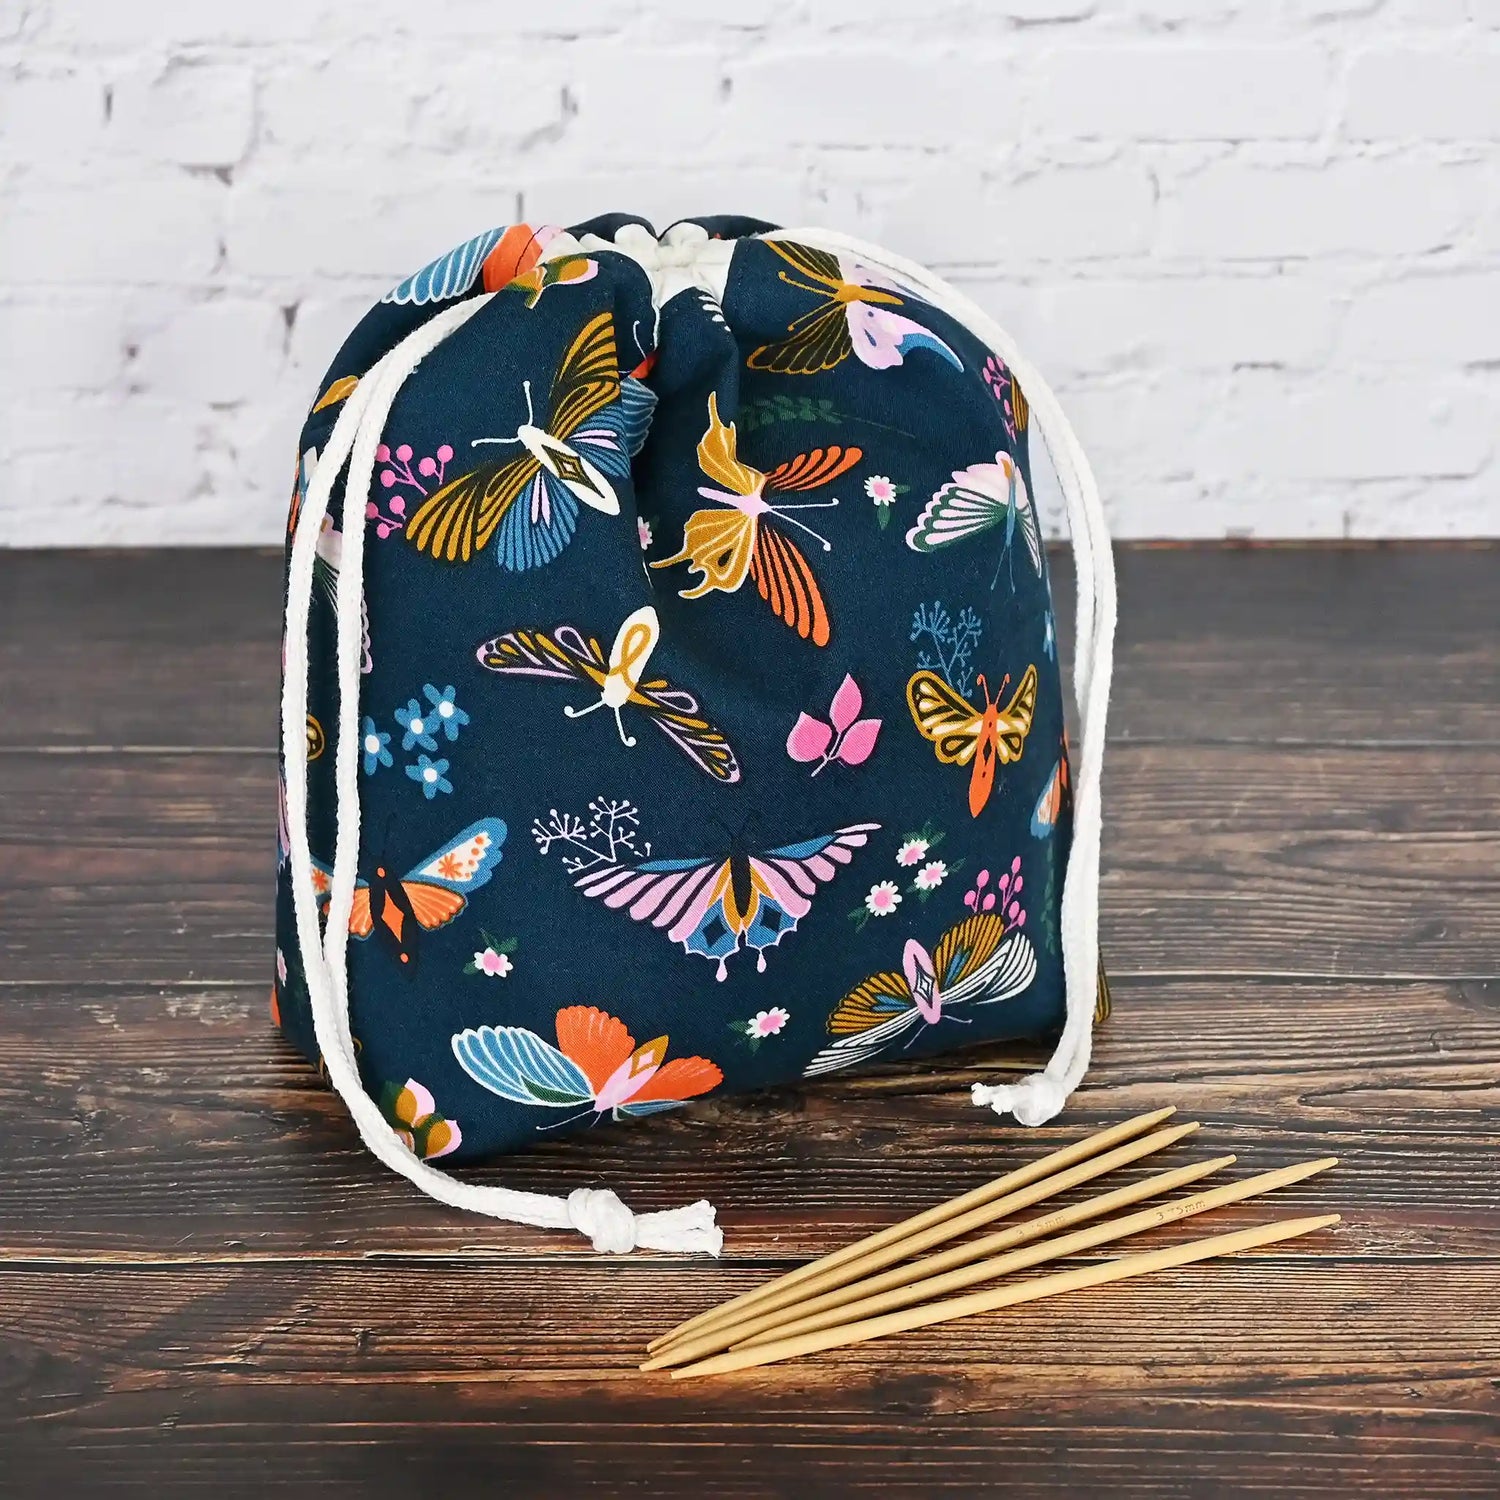 Beautiful butterfly themed drawstring project bag, lined in a pretty aqua floral and with pockets.  Made in Canada by Yellow Petal Handmade.